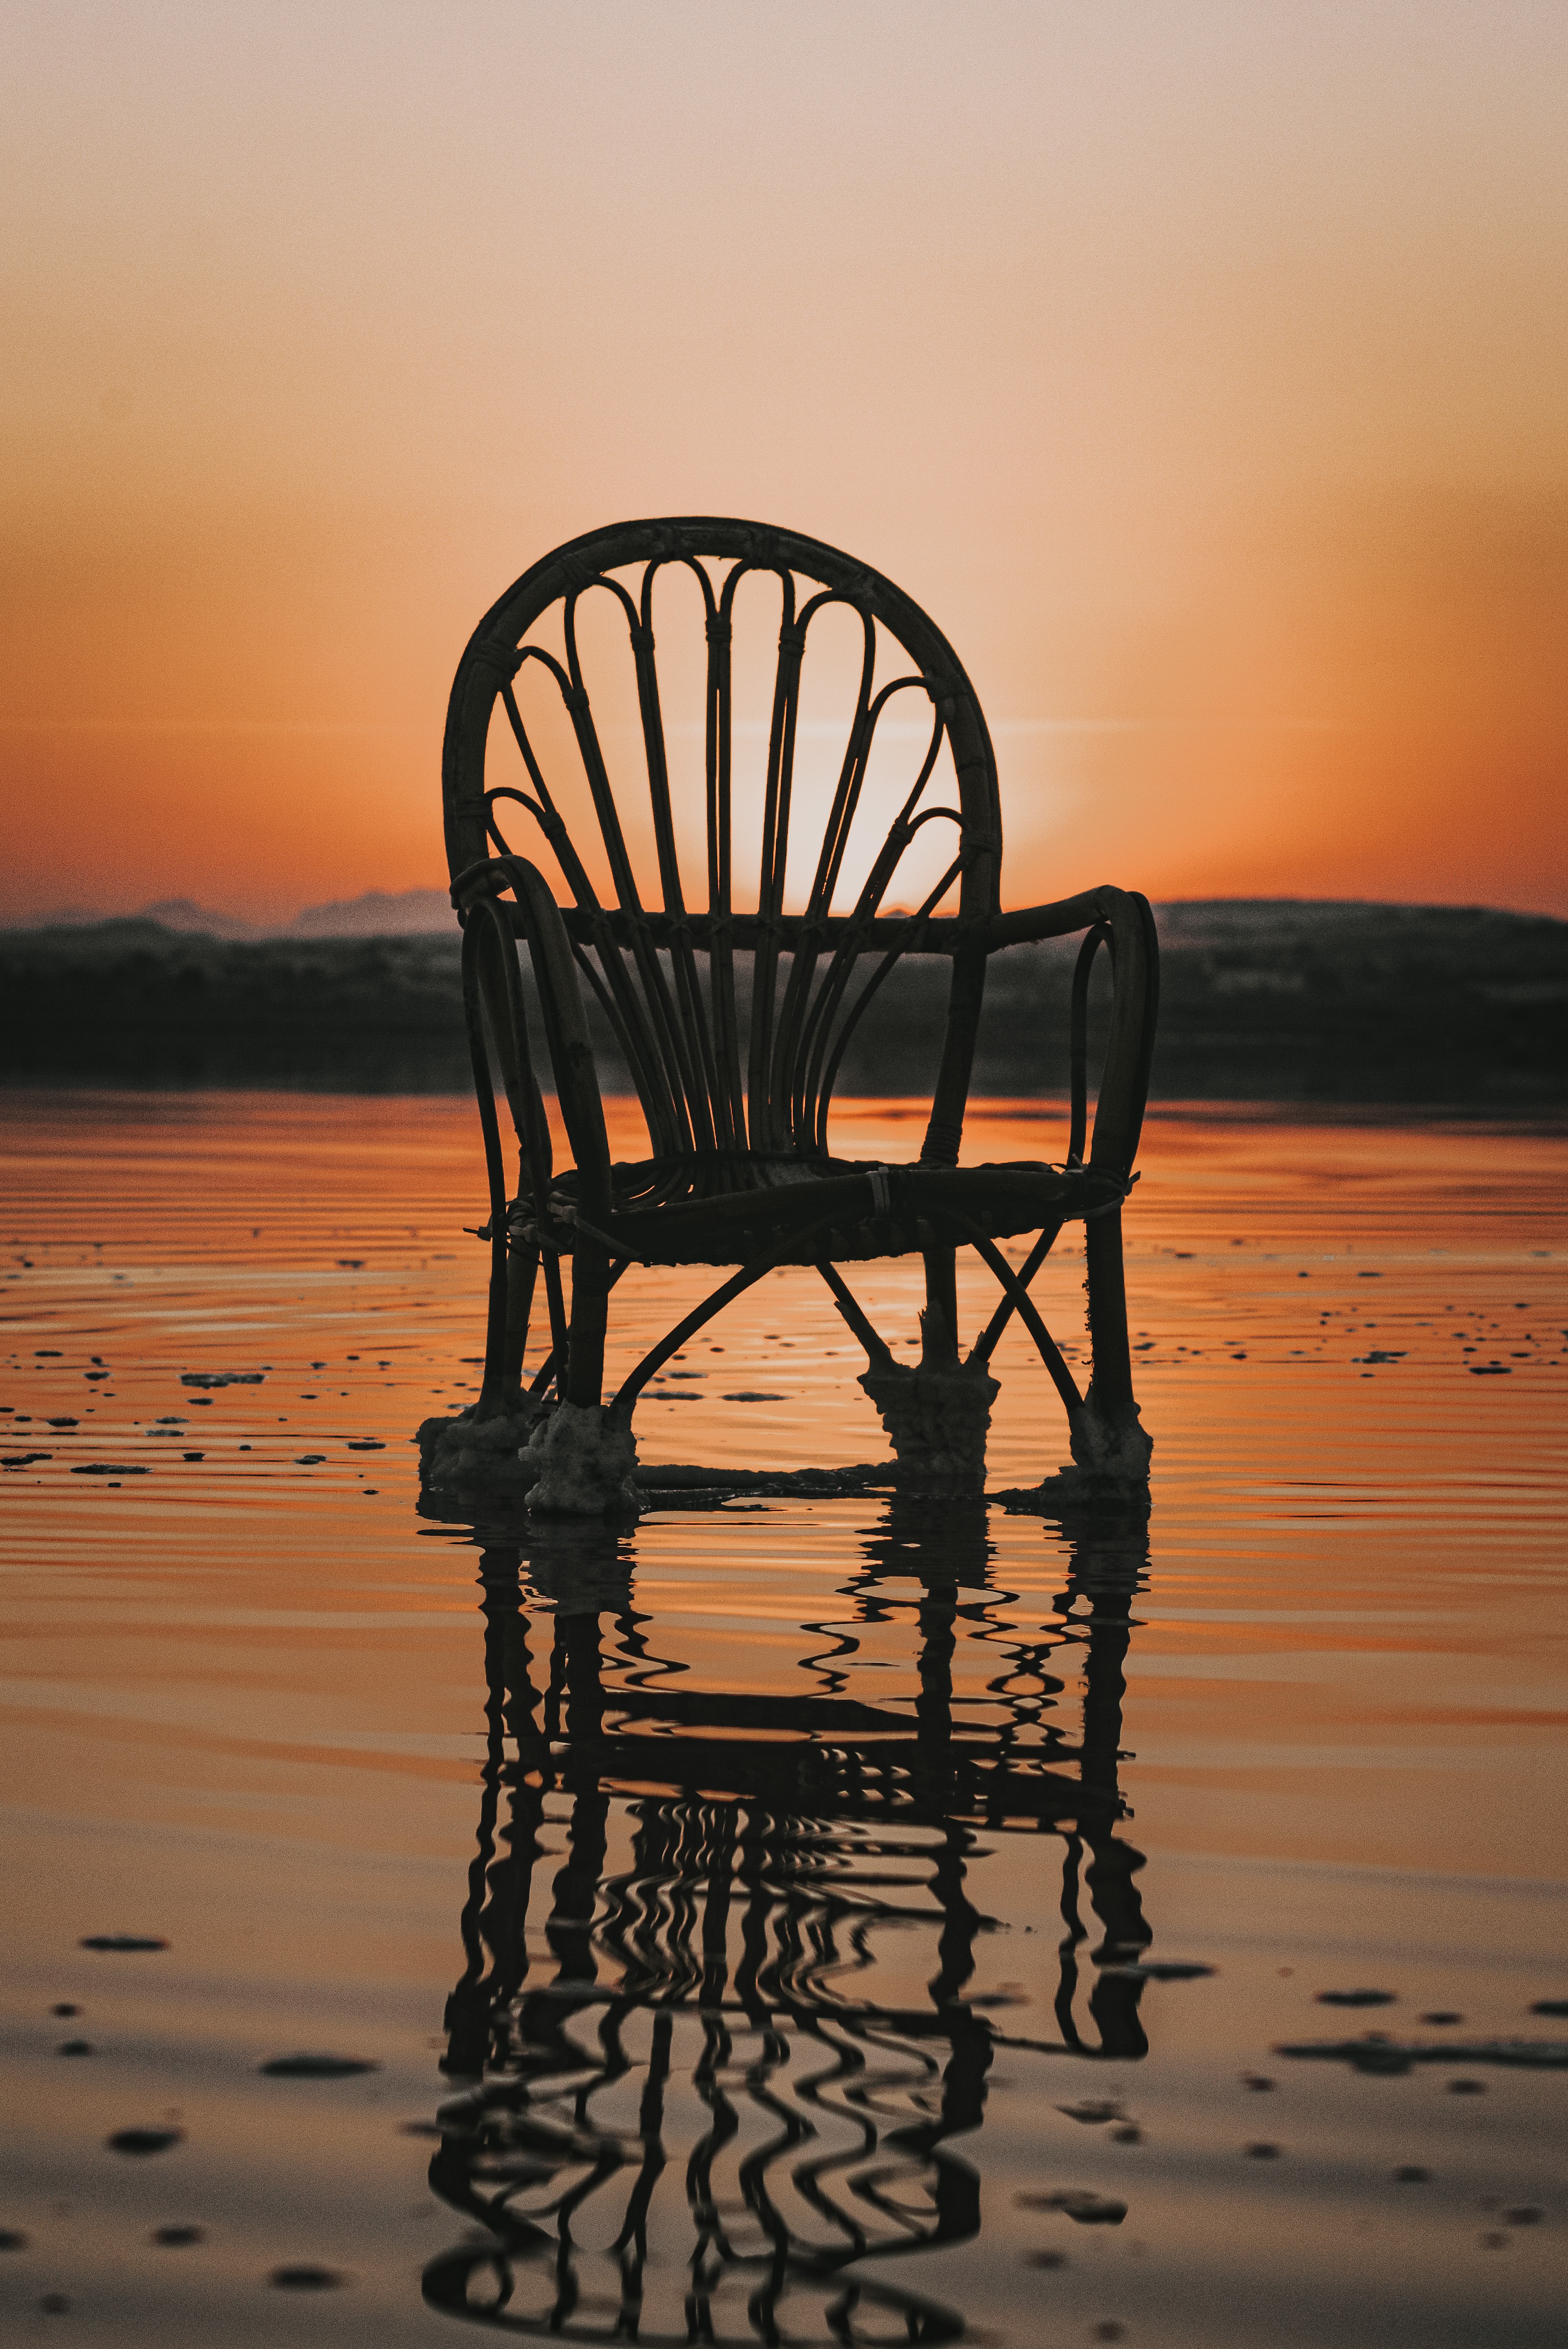 miscellanea, water, sunset, sea, reflection, miscellaneous, chair